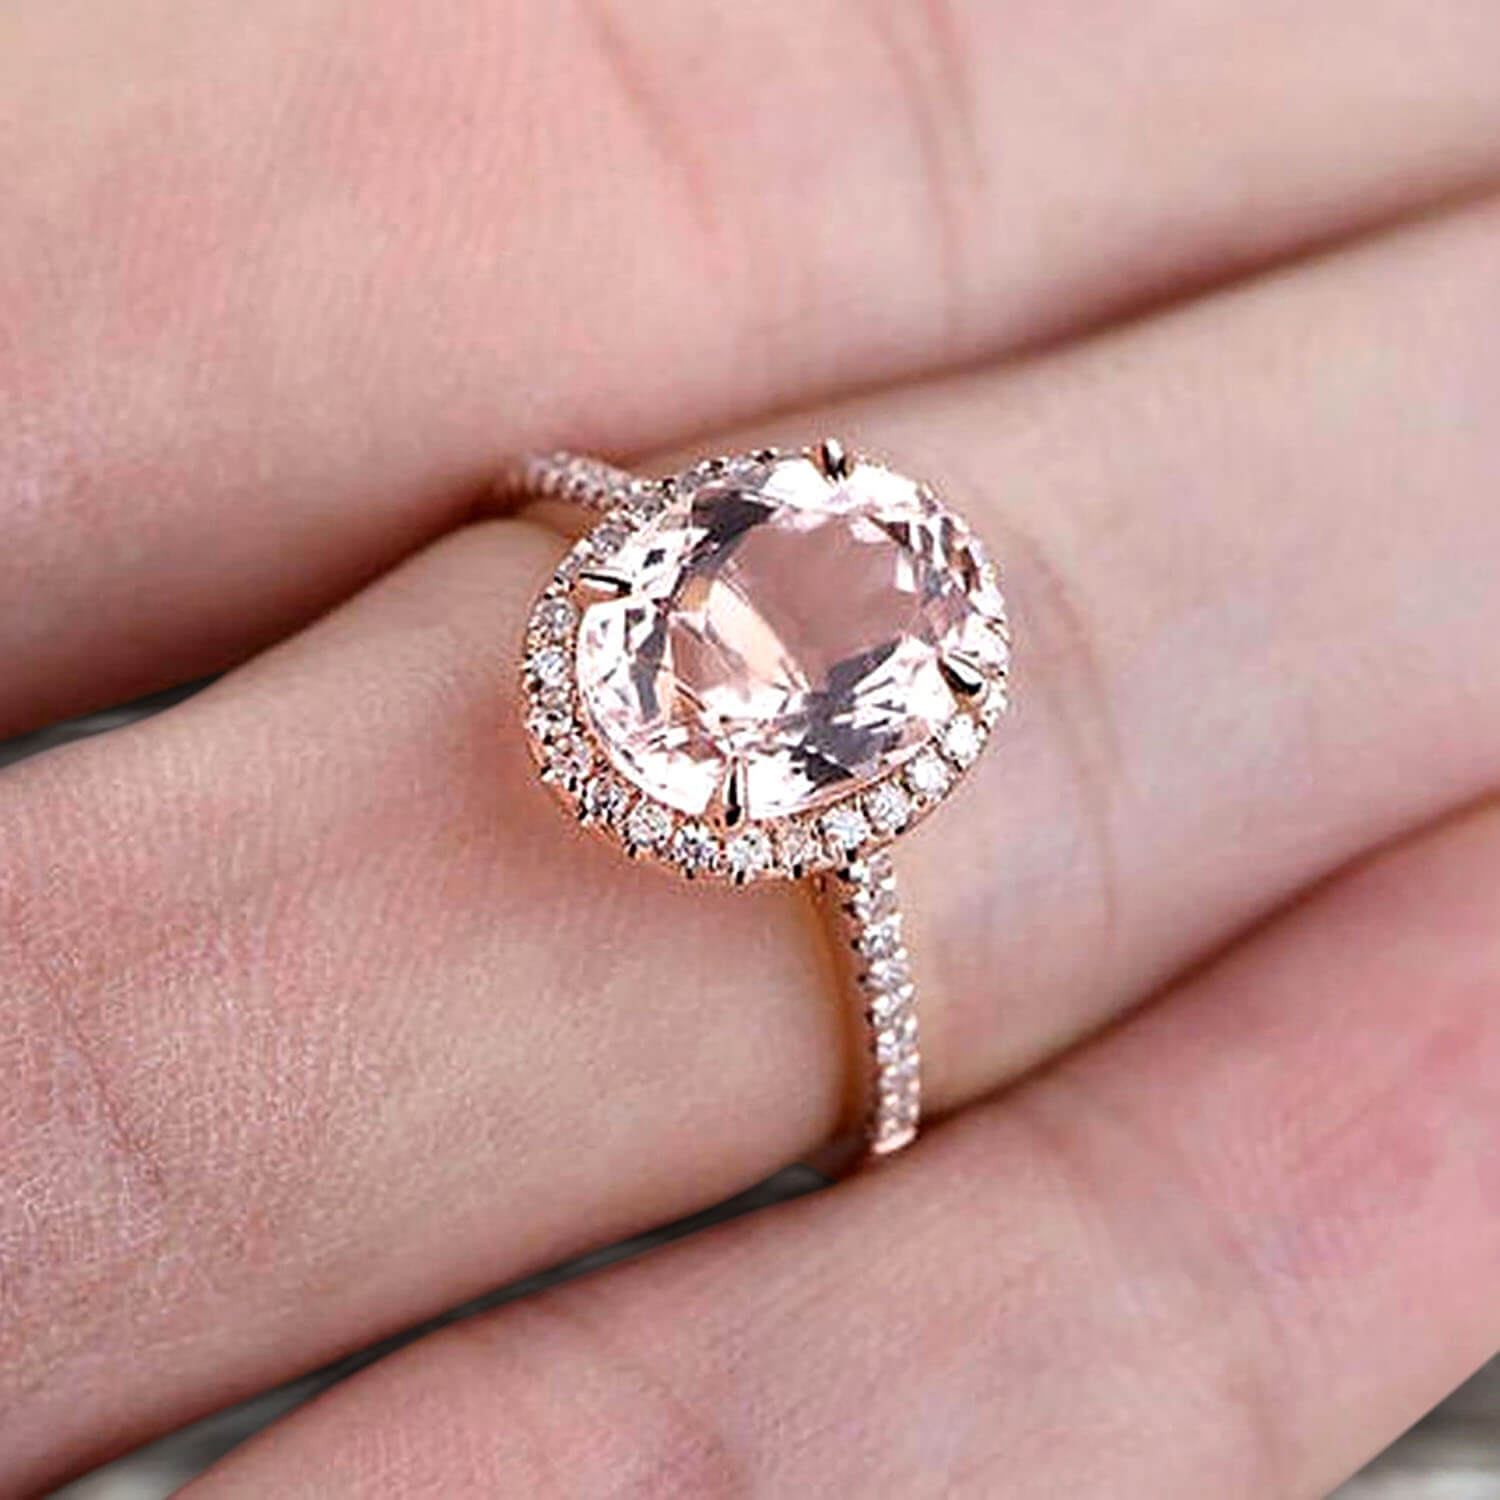 oval engagement rings rose gold